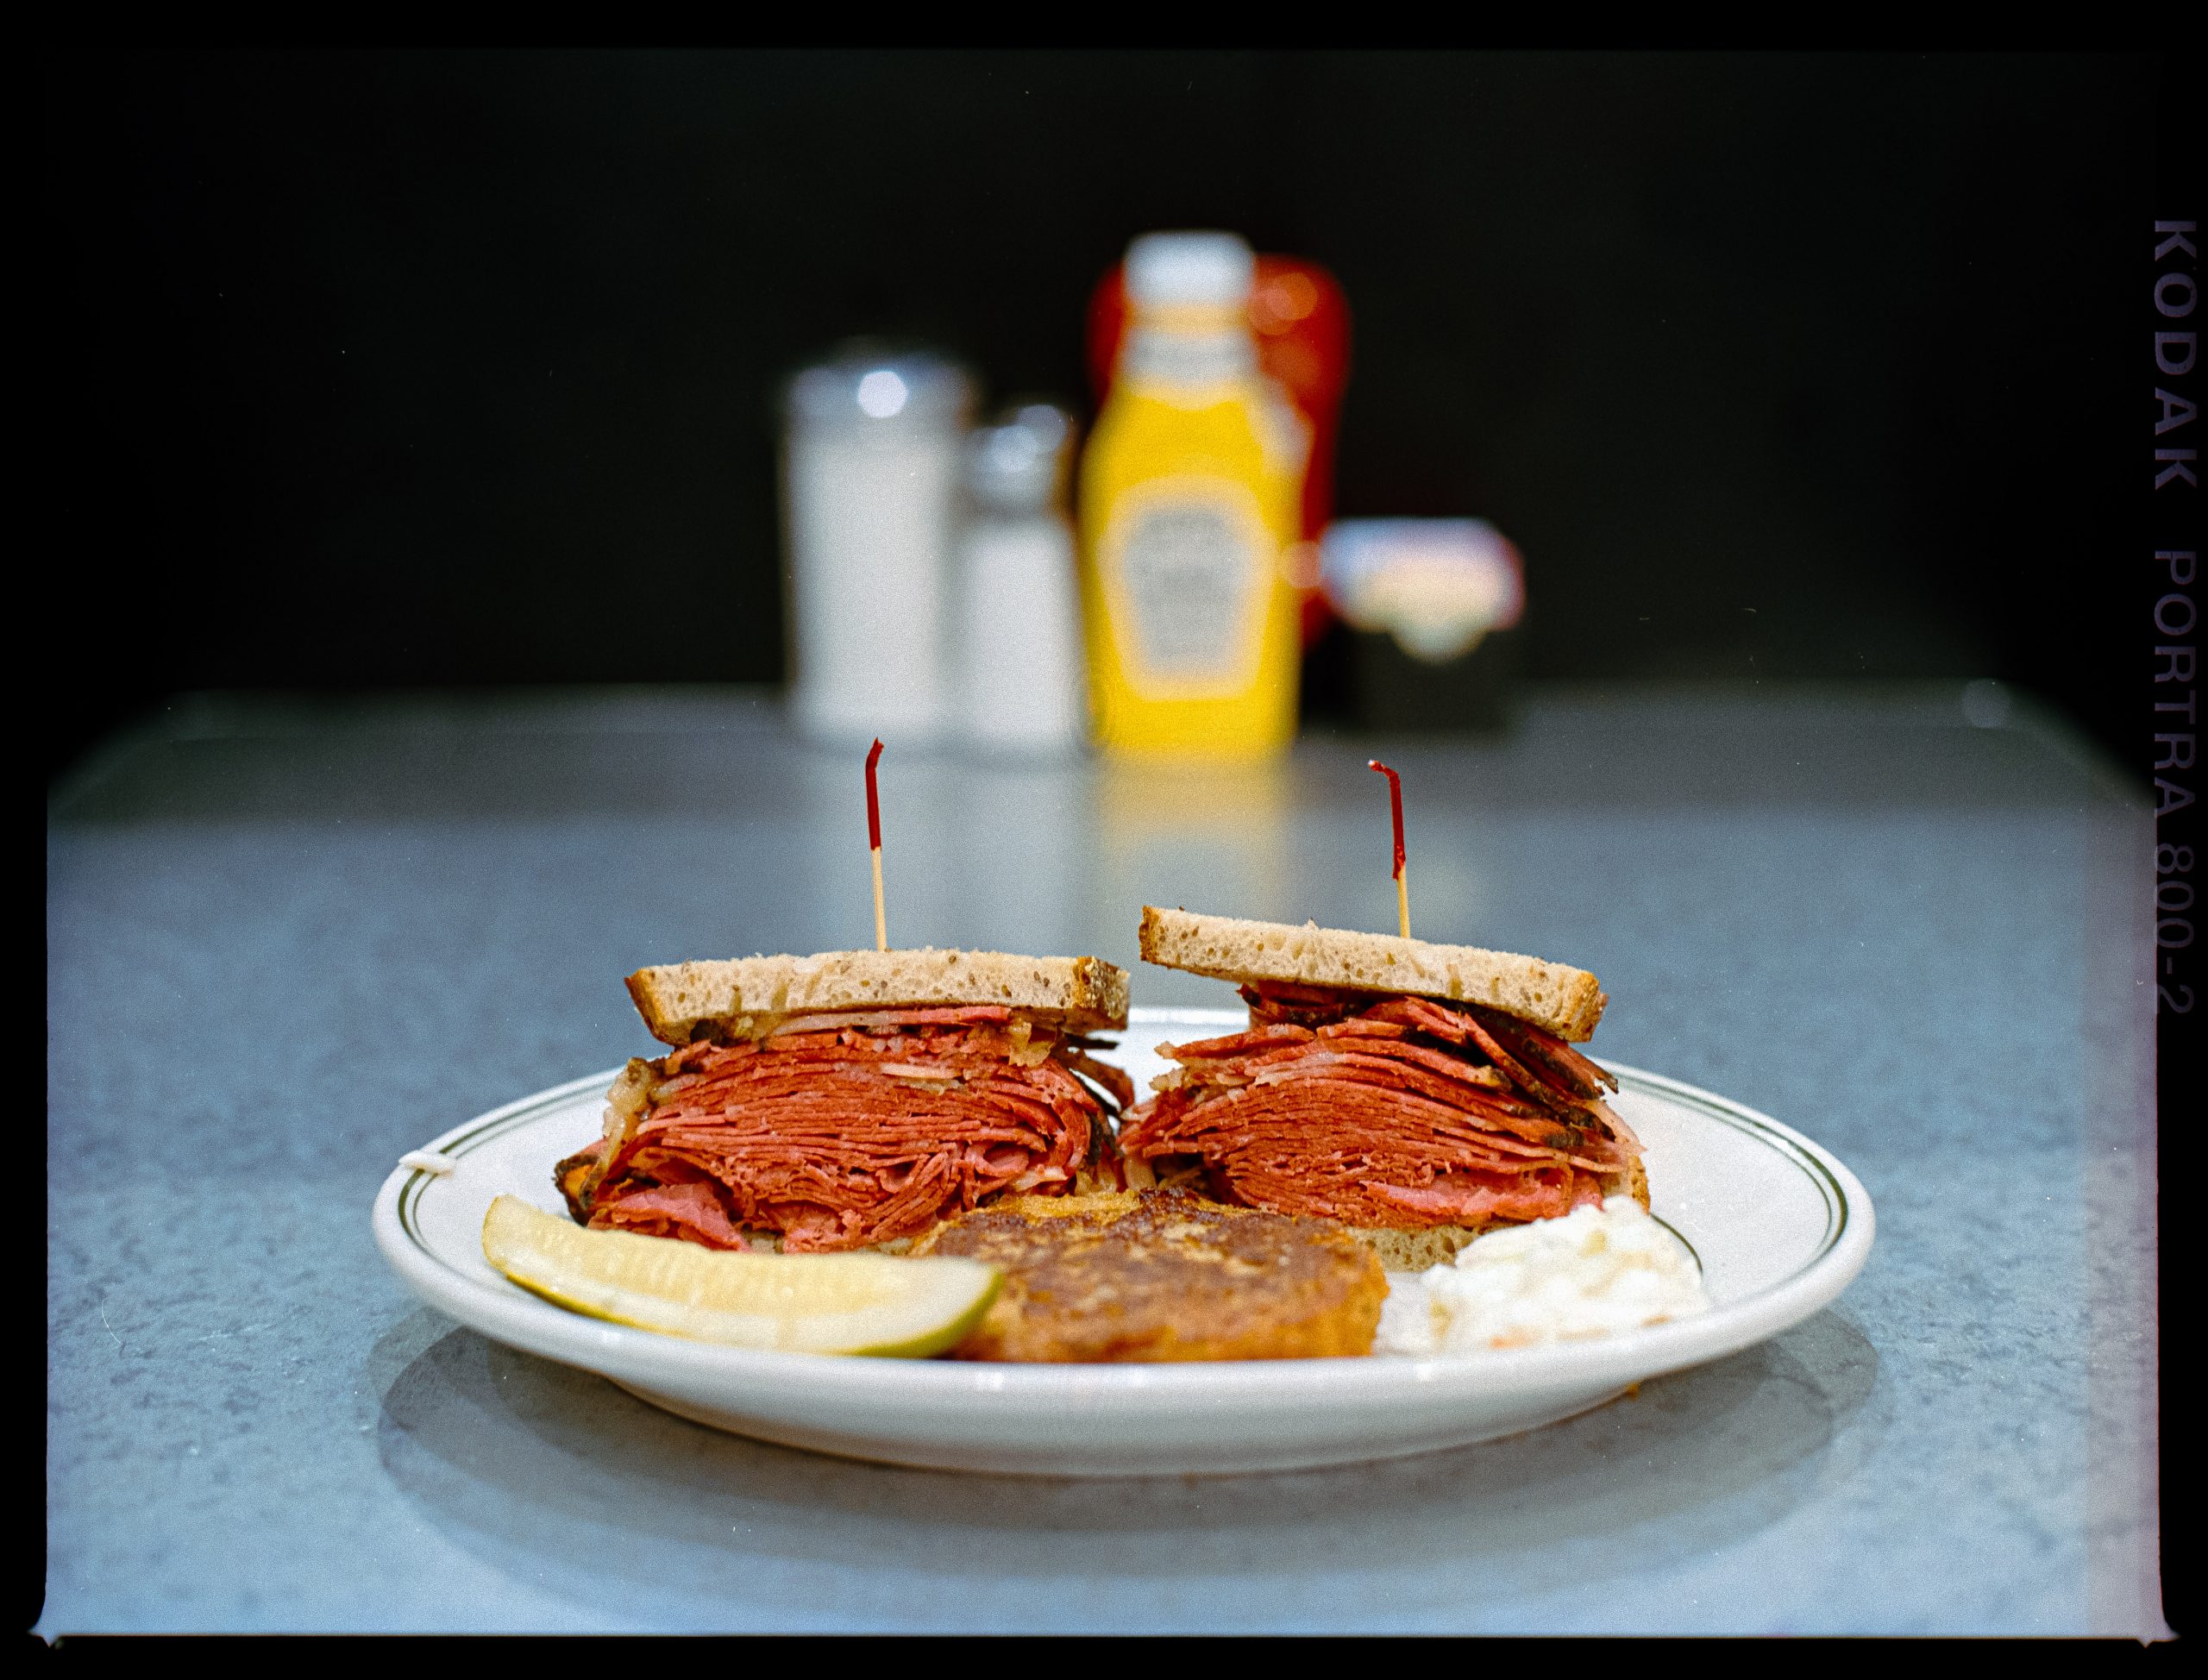 “I’ll Have What She’s Having”: The Jewish Deli